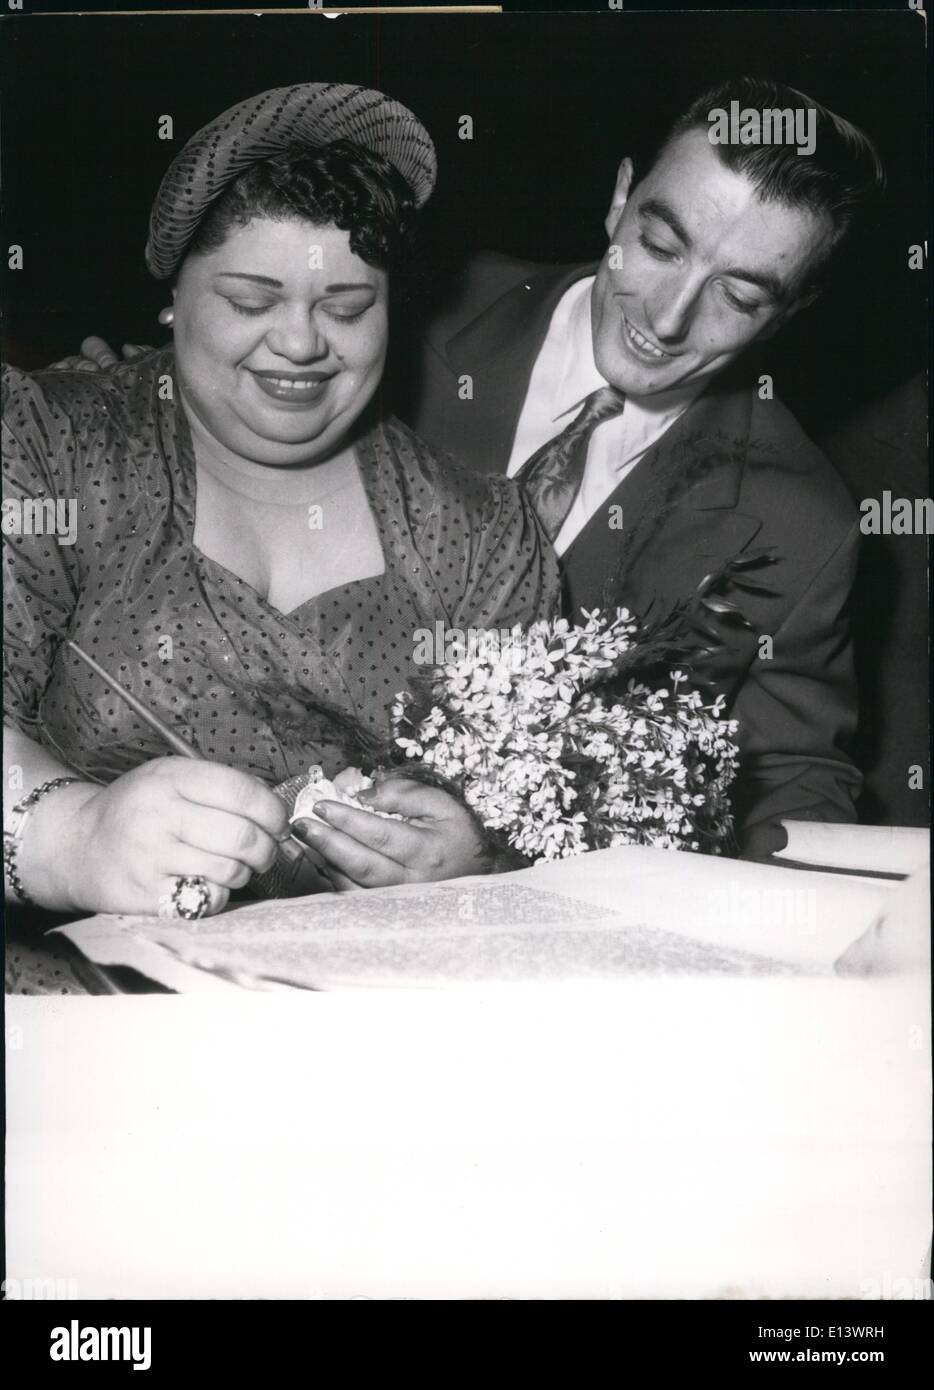 Mar. 27, 2012 - Heavyweight U.S. Star Marries a chorus boy in Paris.: June Richmond who weighs 220 lbs was married today to chorus boy Guy Province at the Town Hall at Neuilly a suburb of Paris today. They are both appearing in the Casino de Paris revue ''Thunder Revue'' (Revue de Tonnerre) Photo show The newly weds sign the register at the Neuilly Town Hall after their wedding today. Stock Photo